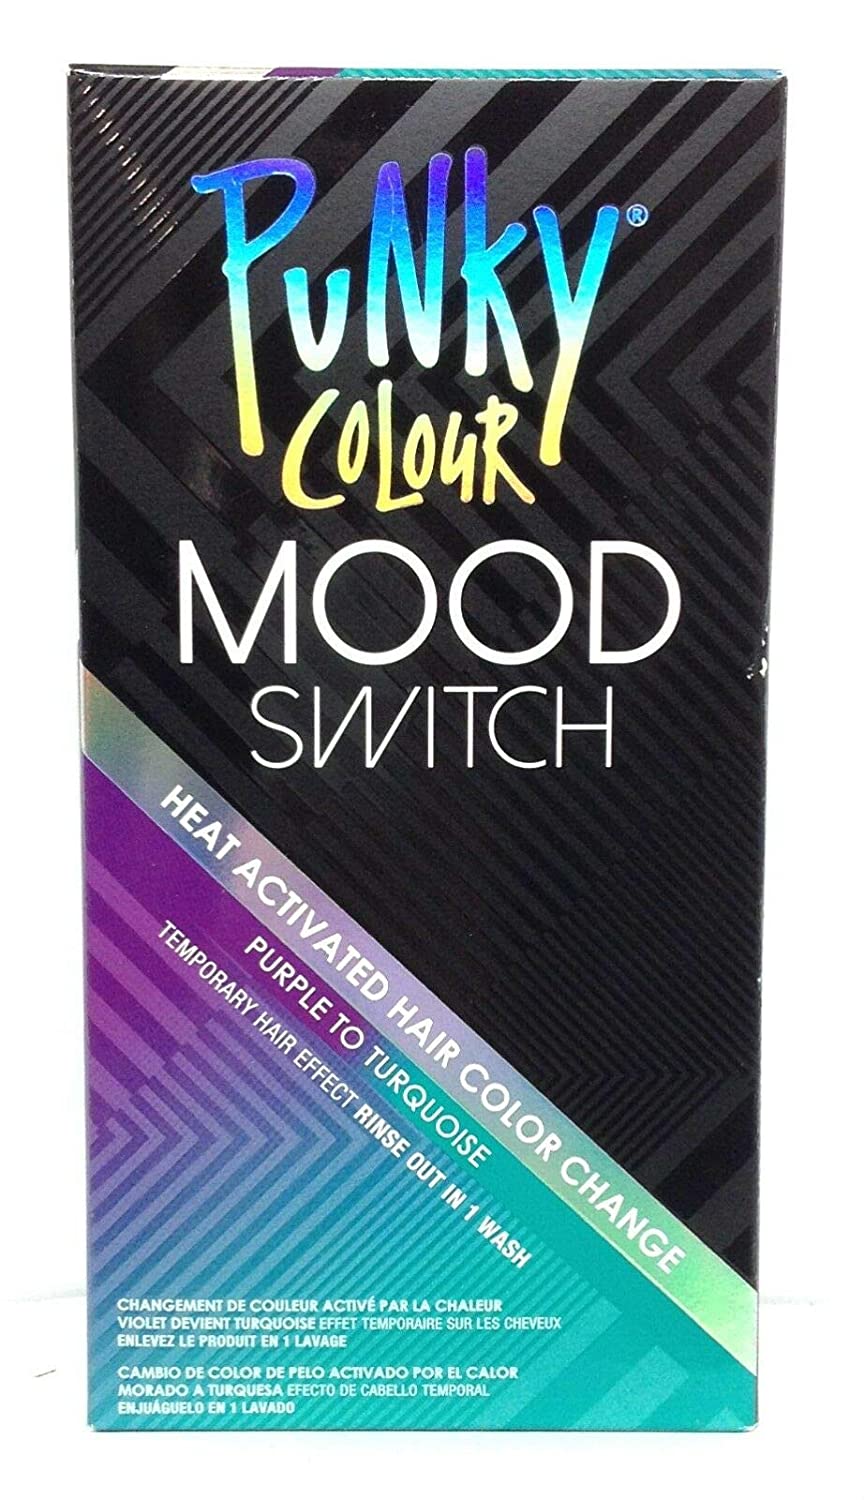 ''Punky Colour Purple To Turquoise Mood Switch Heat Activated HAIR Color Change, Temporary HAIR Effec